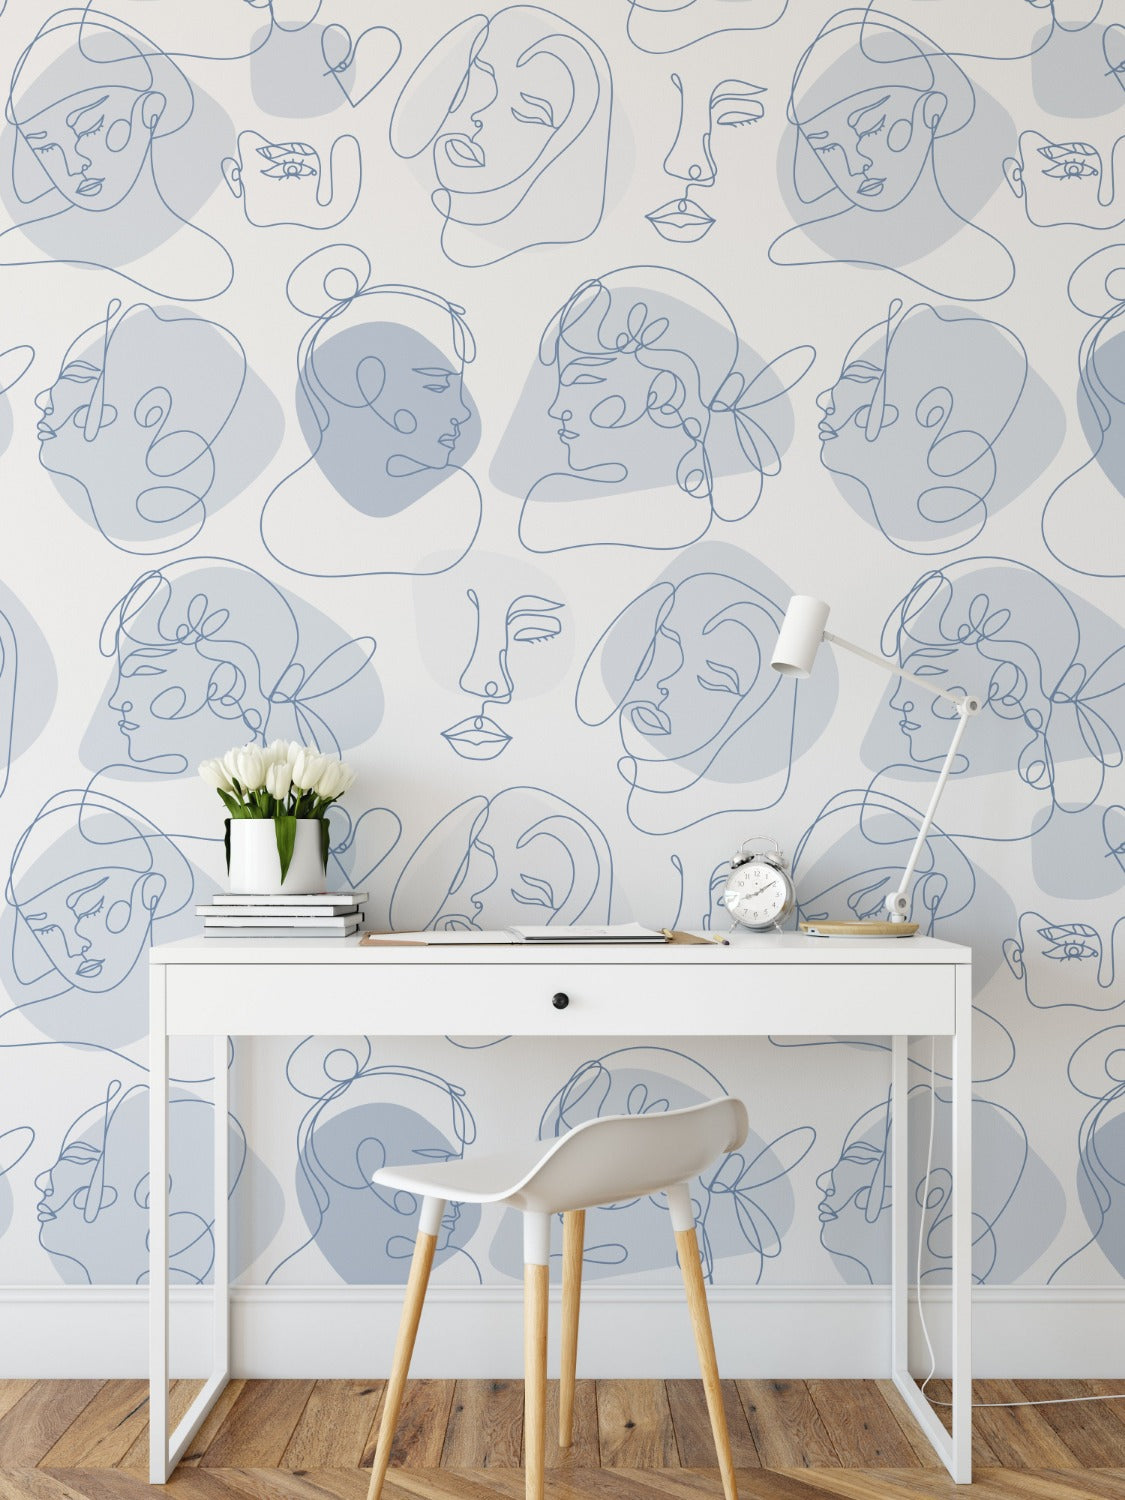 Another room setup featuring the abstract line art faces wallpaper. The design adds an artistic touch to a simple office space with a white desk, a modern chair, and minimal decorations, highlighting how the wallpaper can transform a working environment.